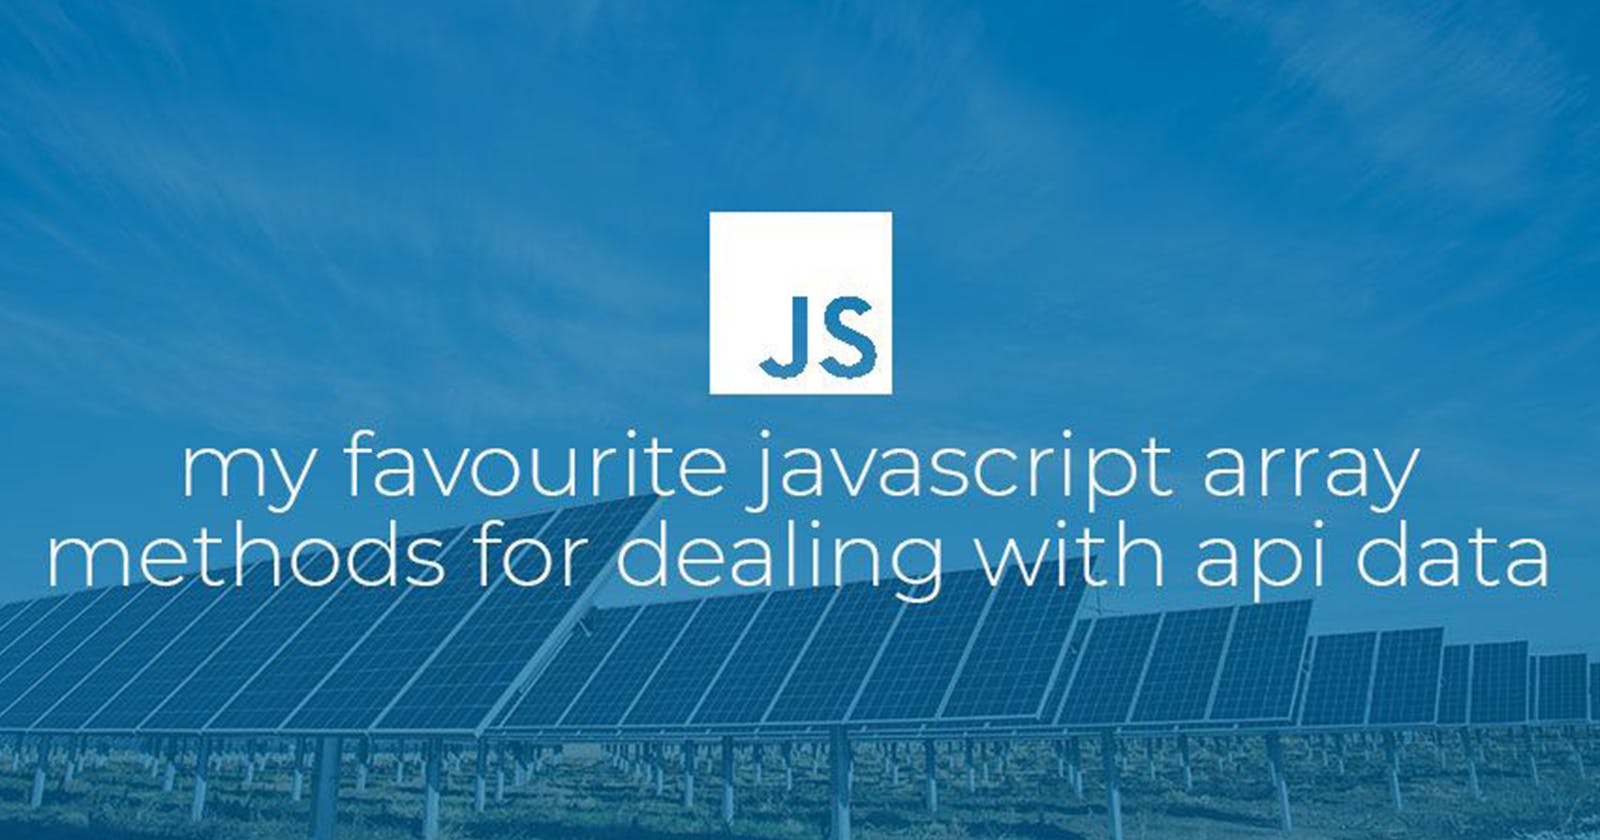 My favourite JavaScript array methods for dealing with Api data.